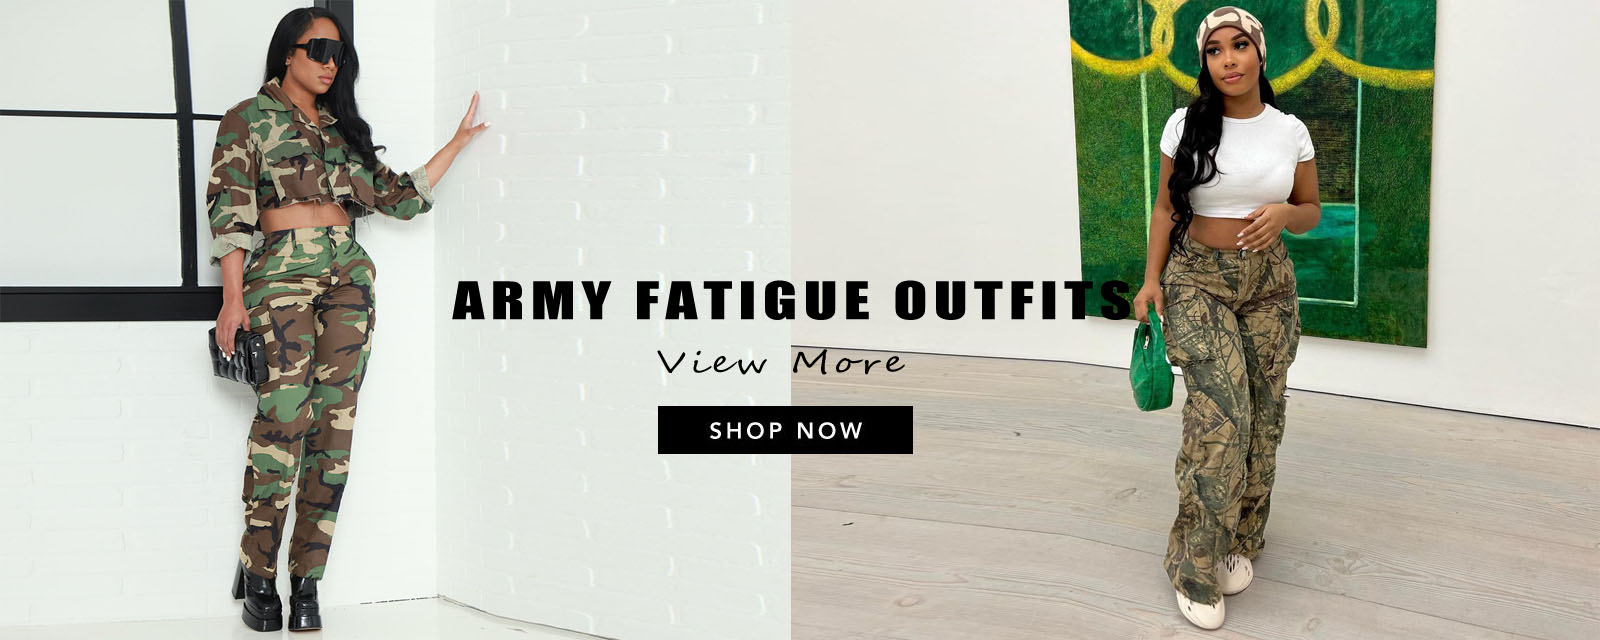 army fatigue outfits